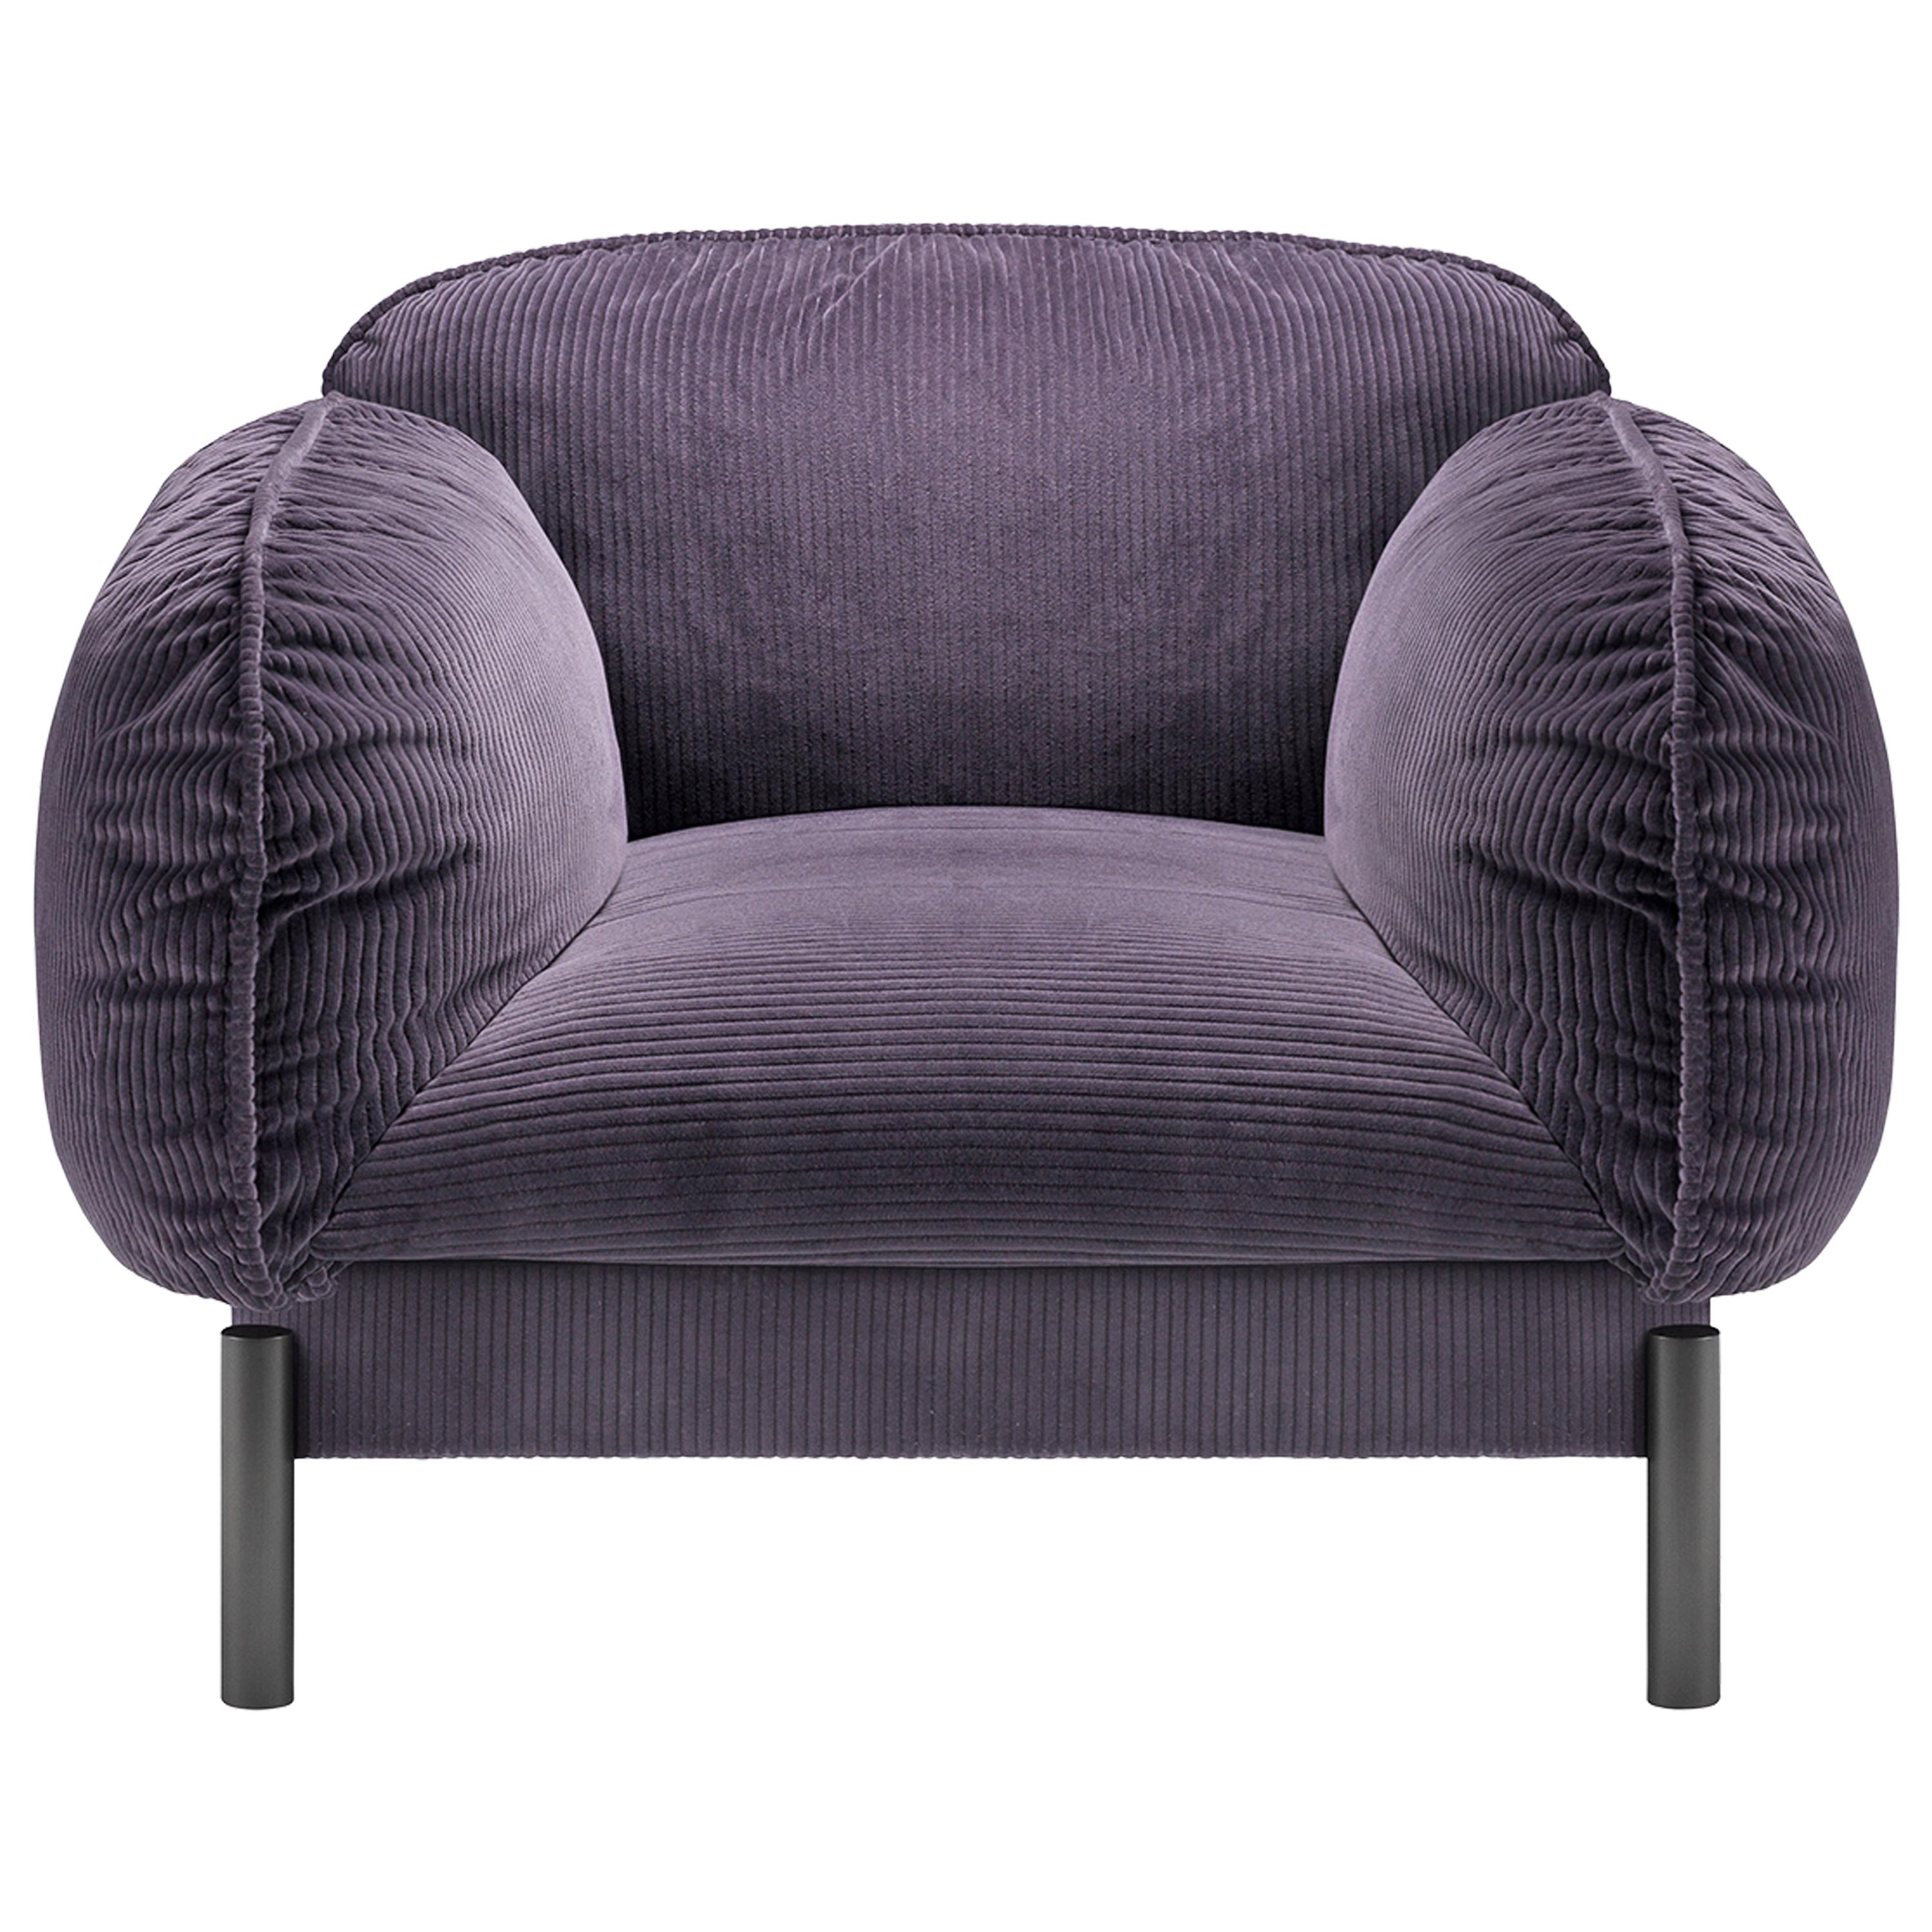 Ghidini 1961 Tarantino Armchair in Purple Cord Fabric with Brass by L. Bozzoli For Sale